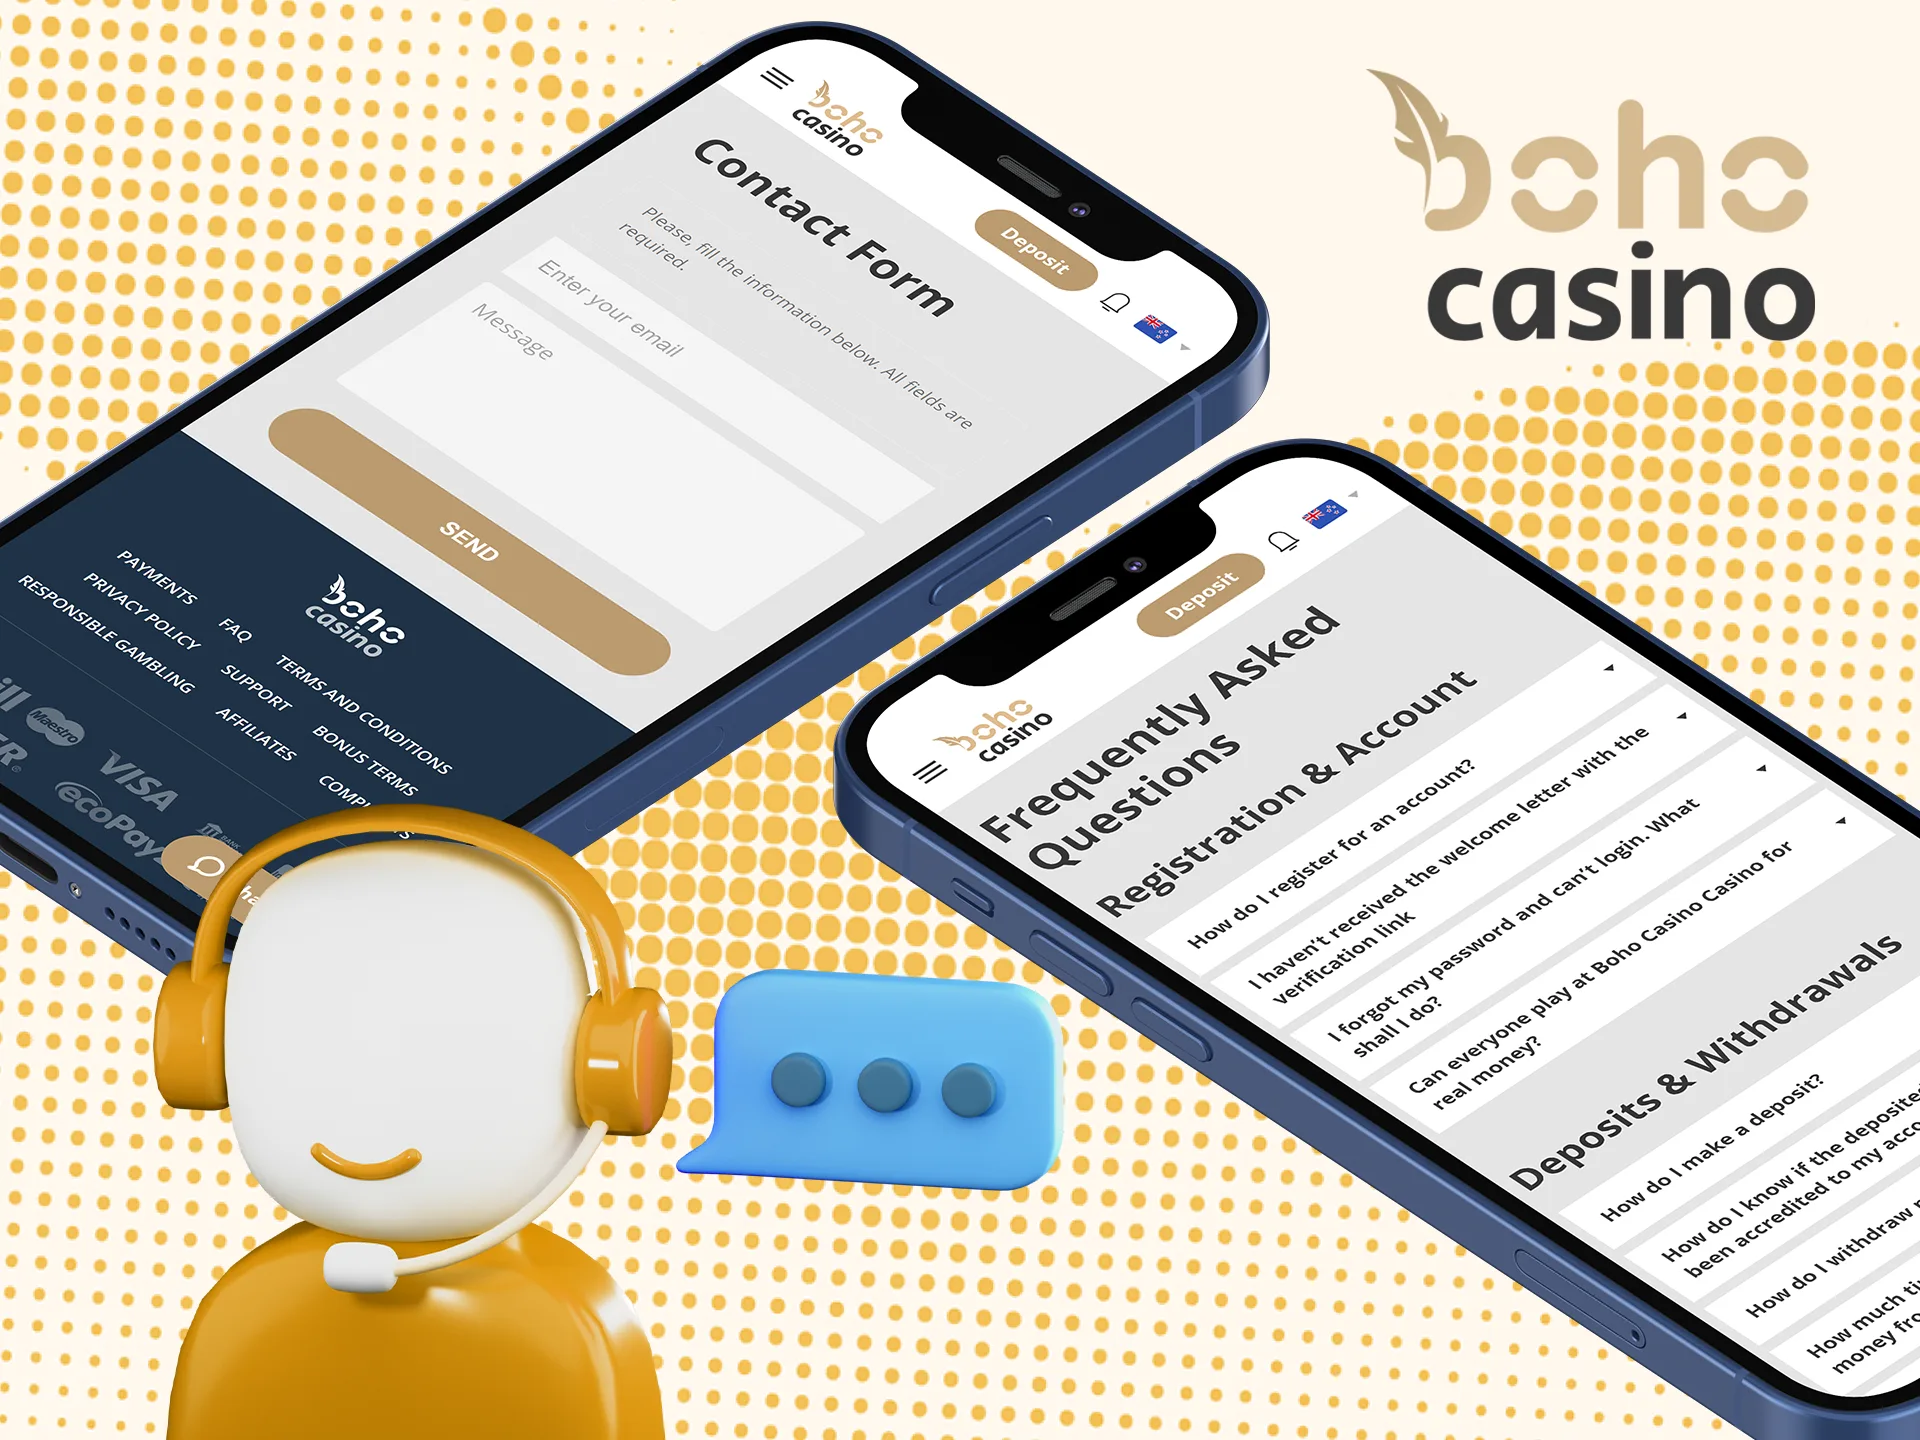 Boho Casino's app customer support team is ready to help you at any time.